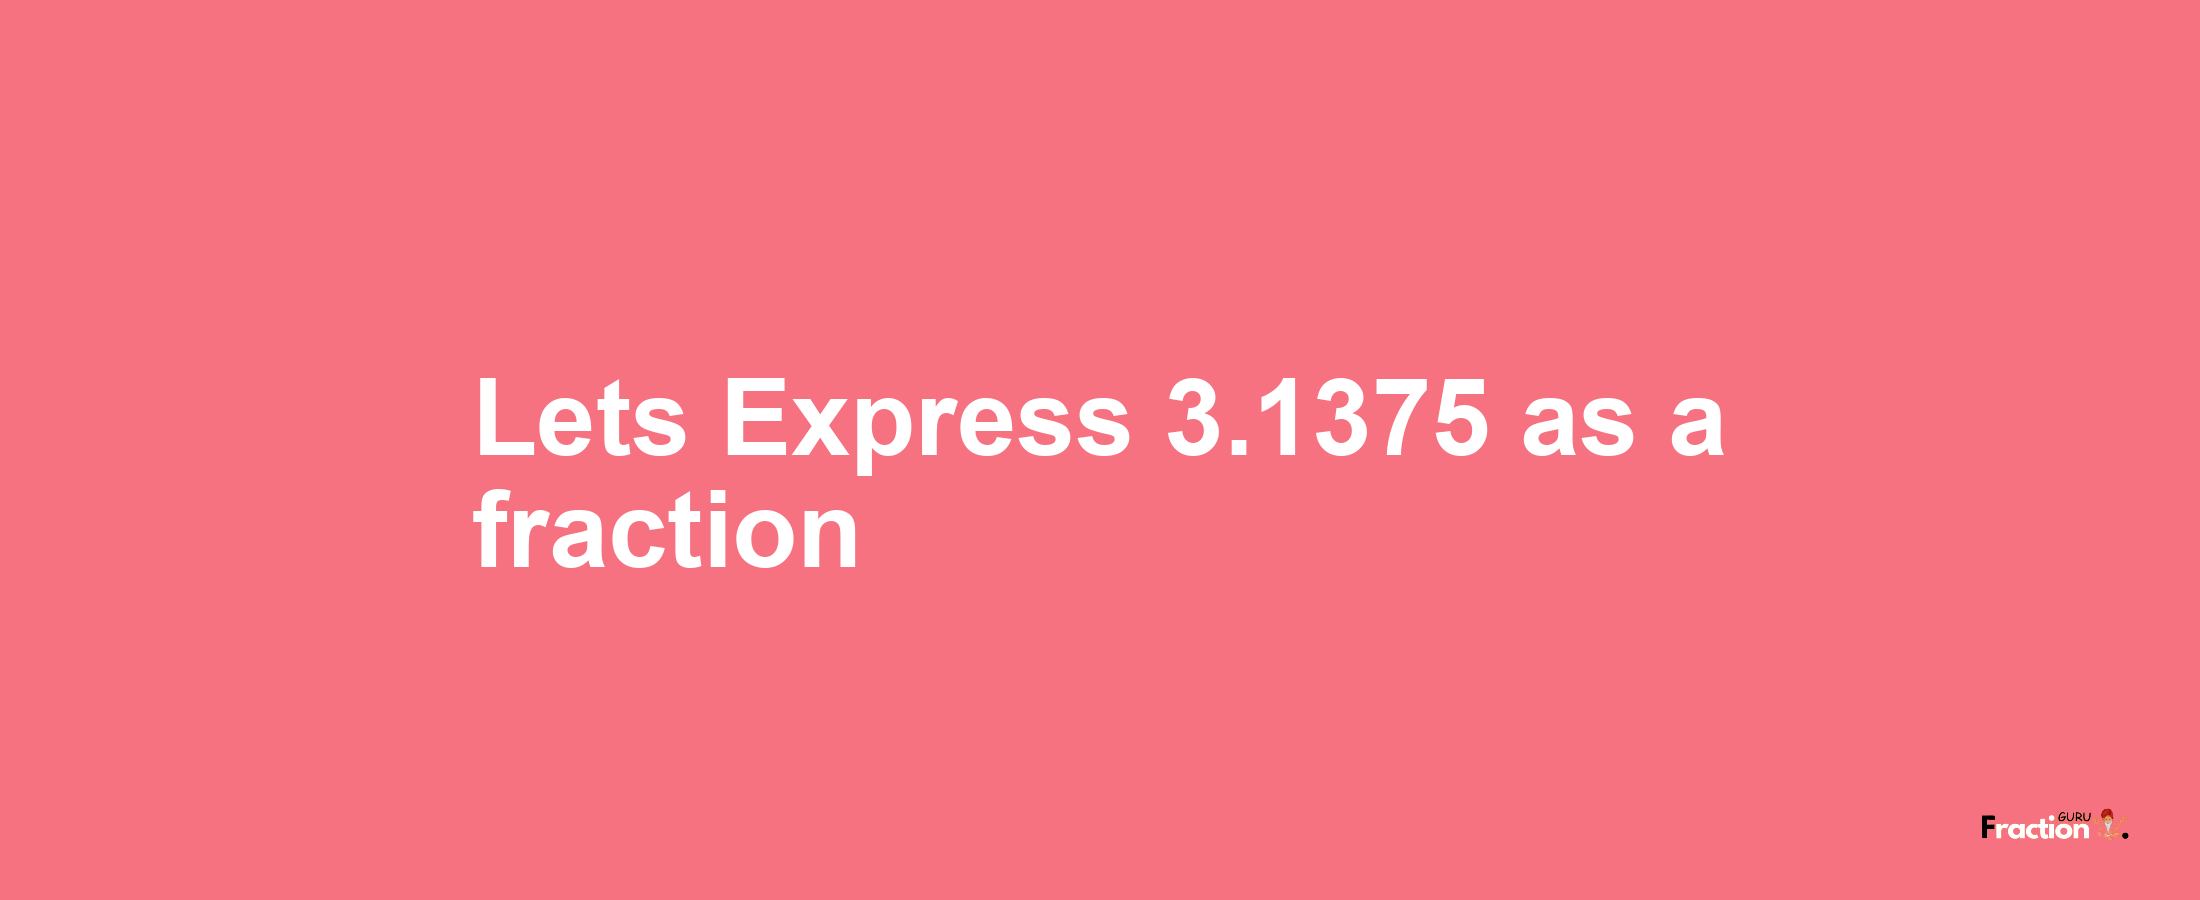 Lets Express 3.1375 as afraction